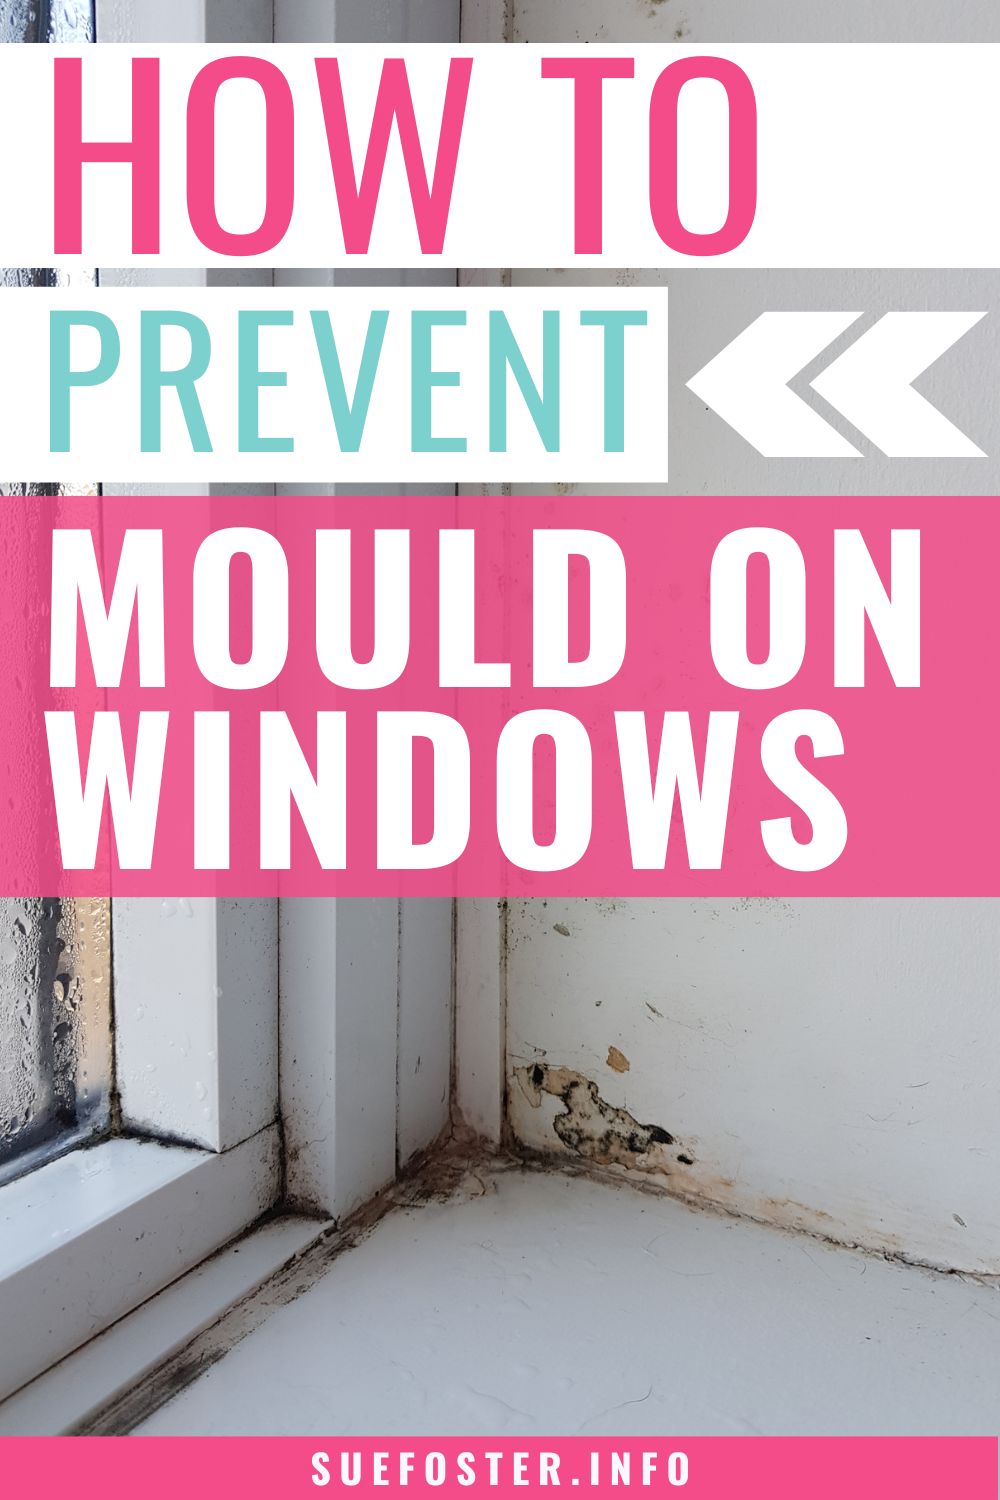 Mould is not always visible to the naked eye, but it can be seen with the help of a magnifying glass or microscope. Follow these tips on how to prevent mould on windows.